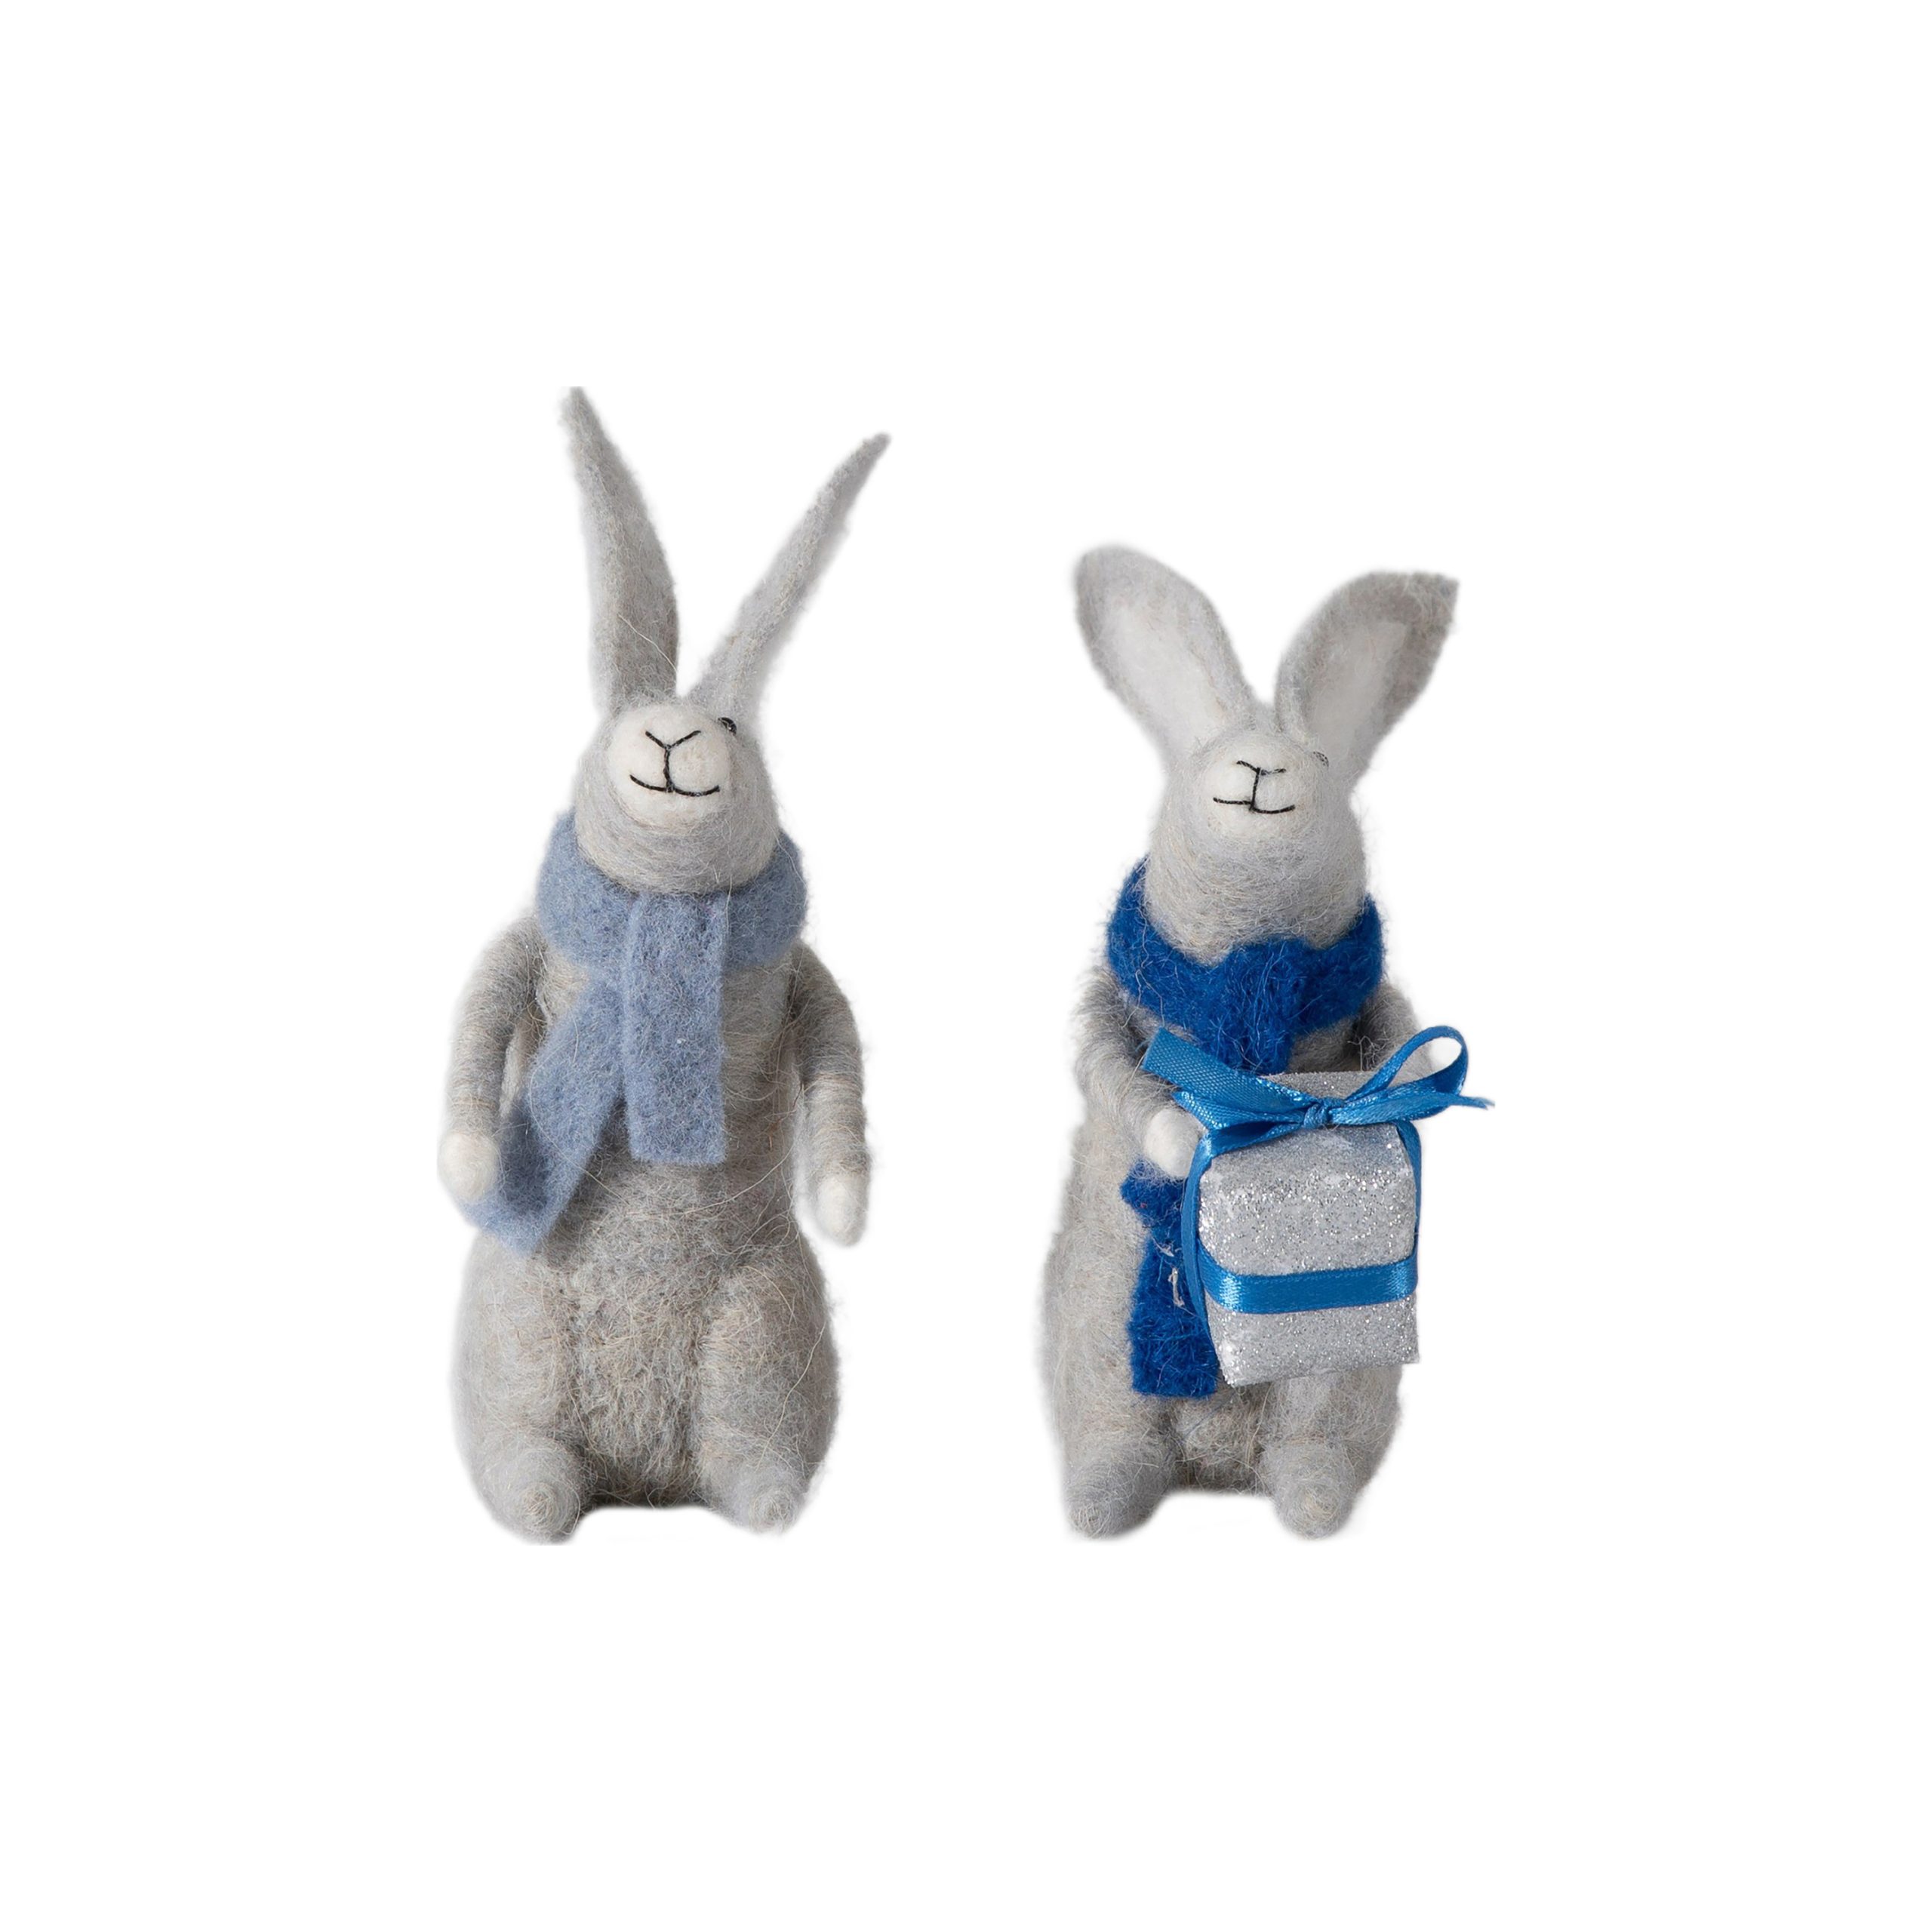 Gallery Direct Gifting Hares Grey (Set of 2)